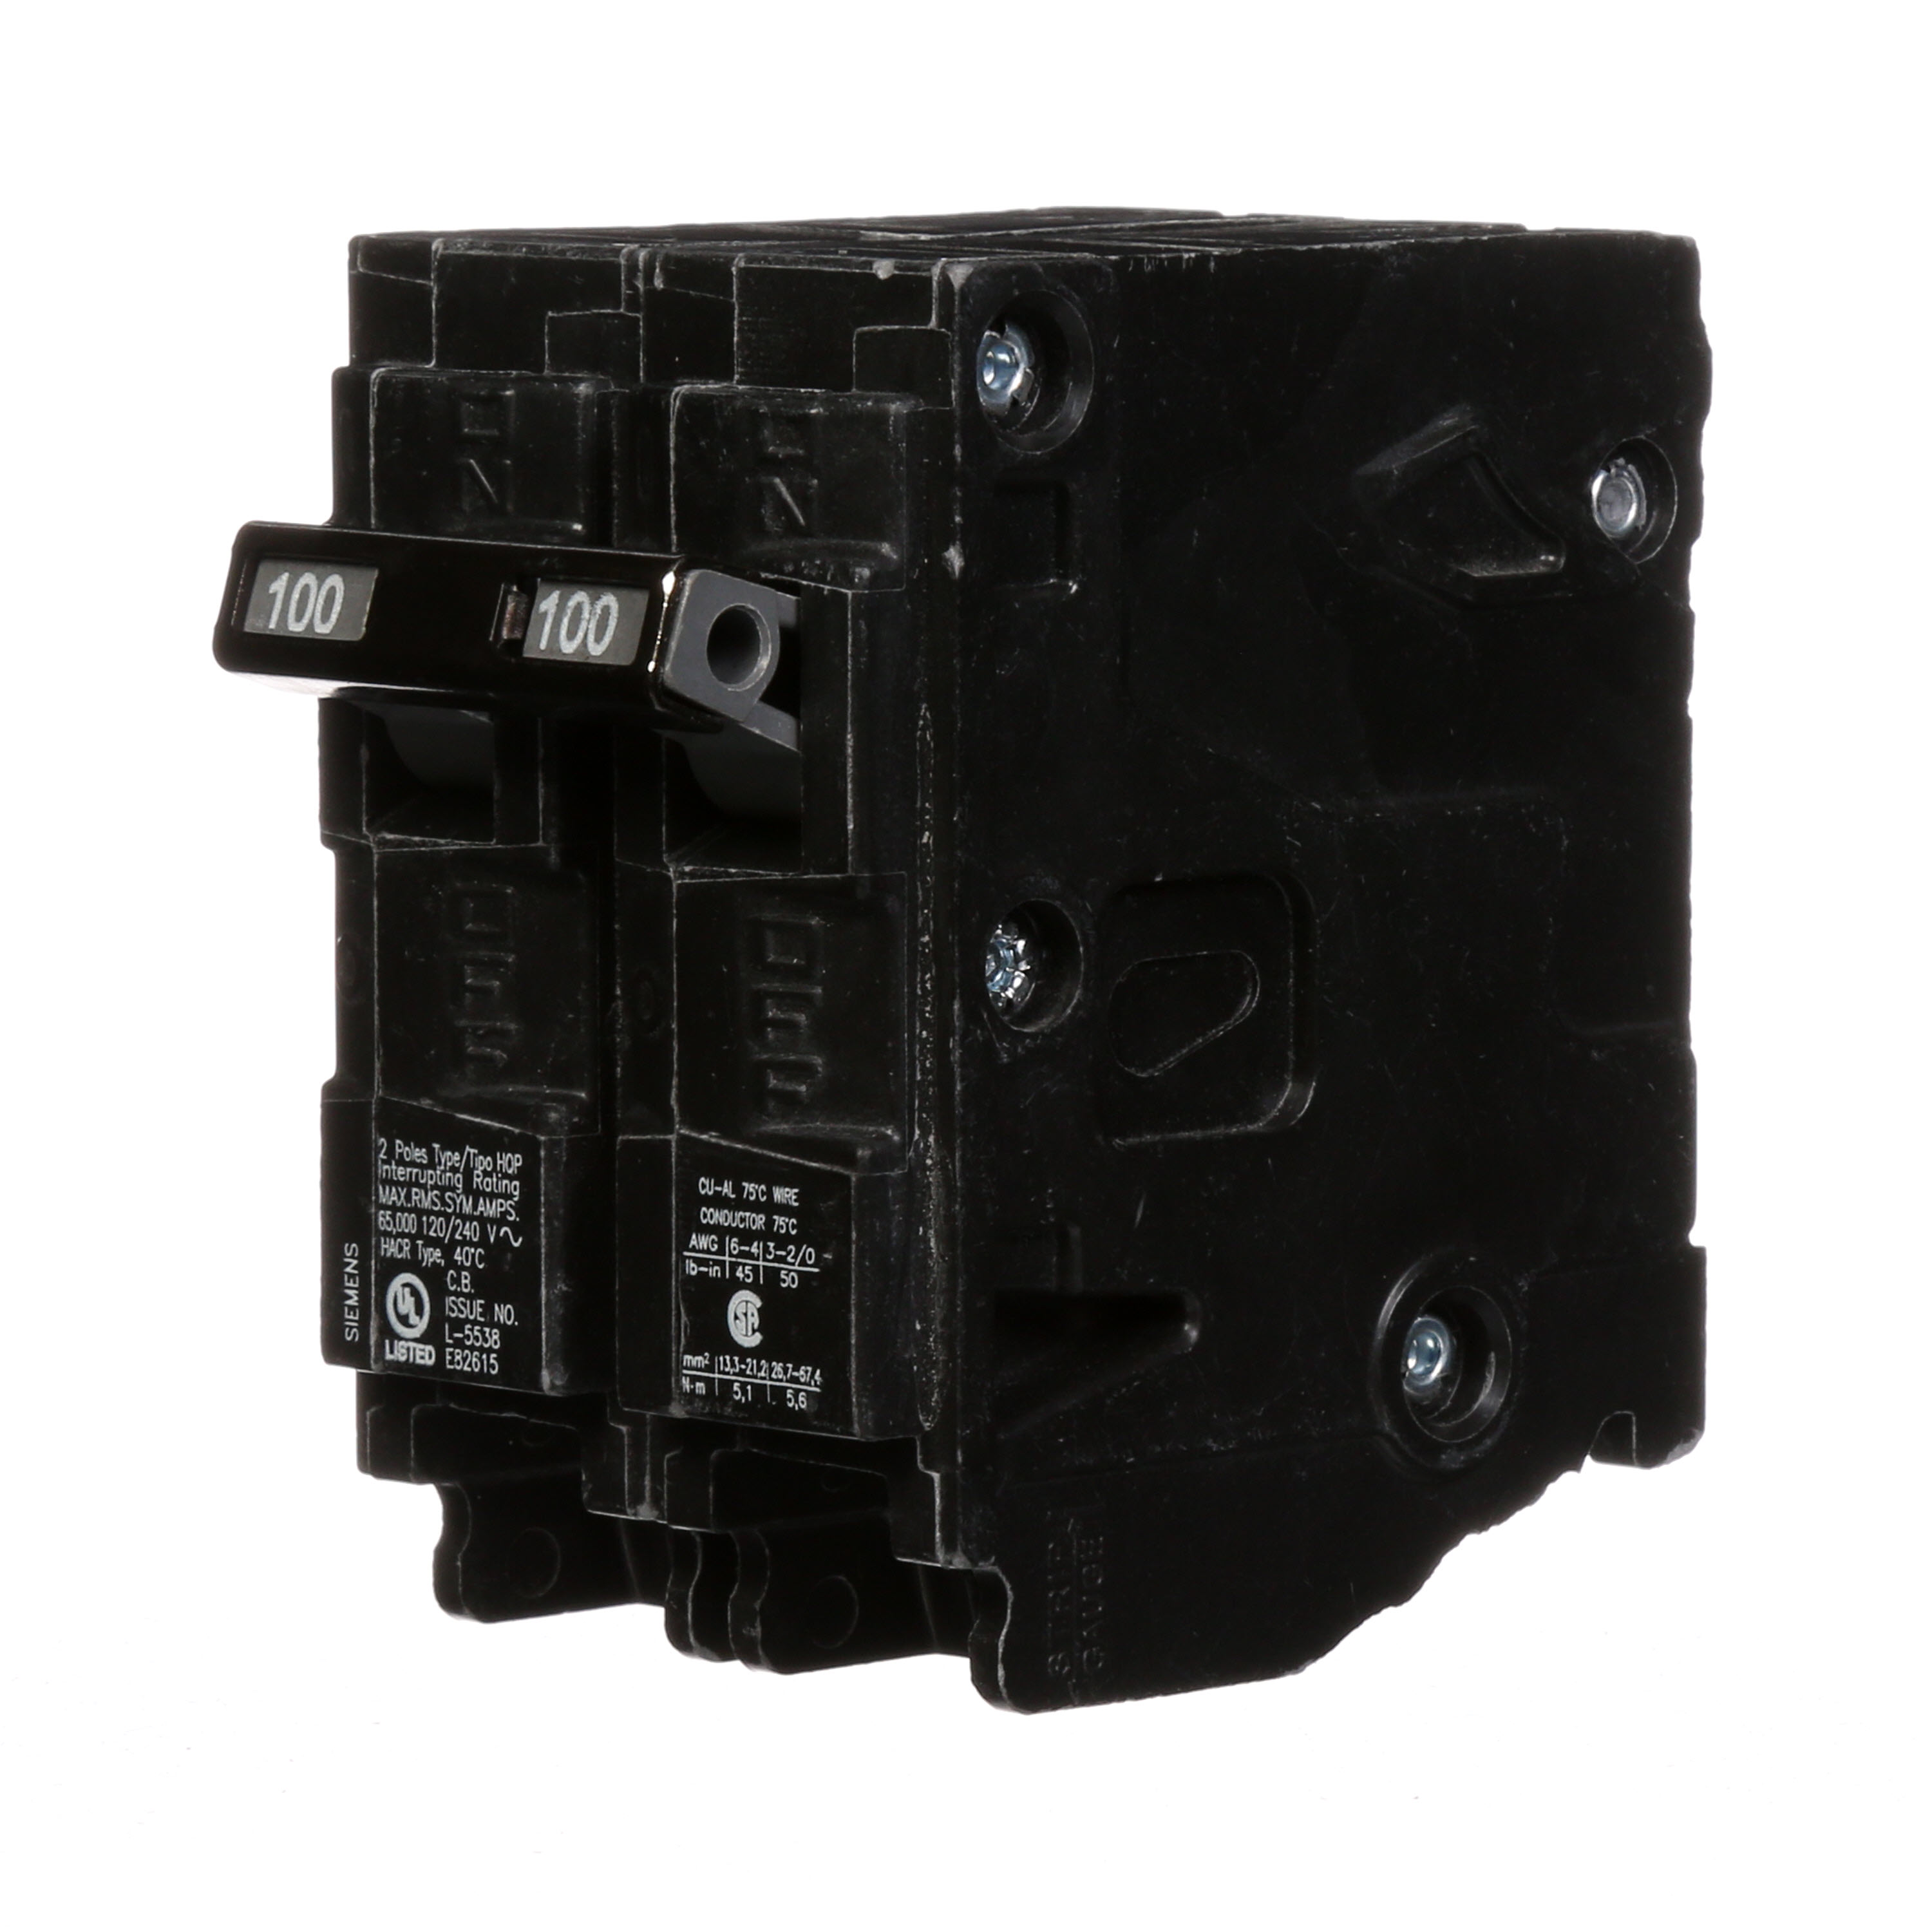 Siemens Low Voltage Residential Circuit Breakers Miniature Thermal Mag Circuit Breakers - Type QP/MP, 2-Pole, 120/240VAC are Circuit Protection Load Center Mains, Feeders, and Miniature Circuit Breakers. Type QP/MP Application Electrical Distribution Standard UL 489 Voltage Rating 120/240V Amperage Rating 100A Trip Range Thermal Magnetic Interrupt Rating 65 AIC Number Of Poles 2P